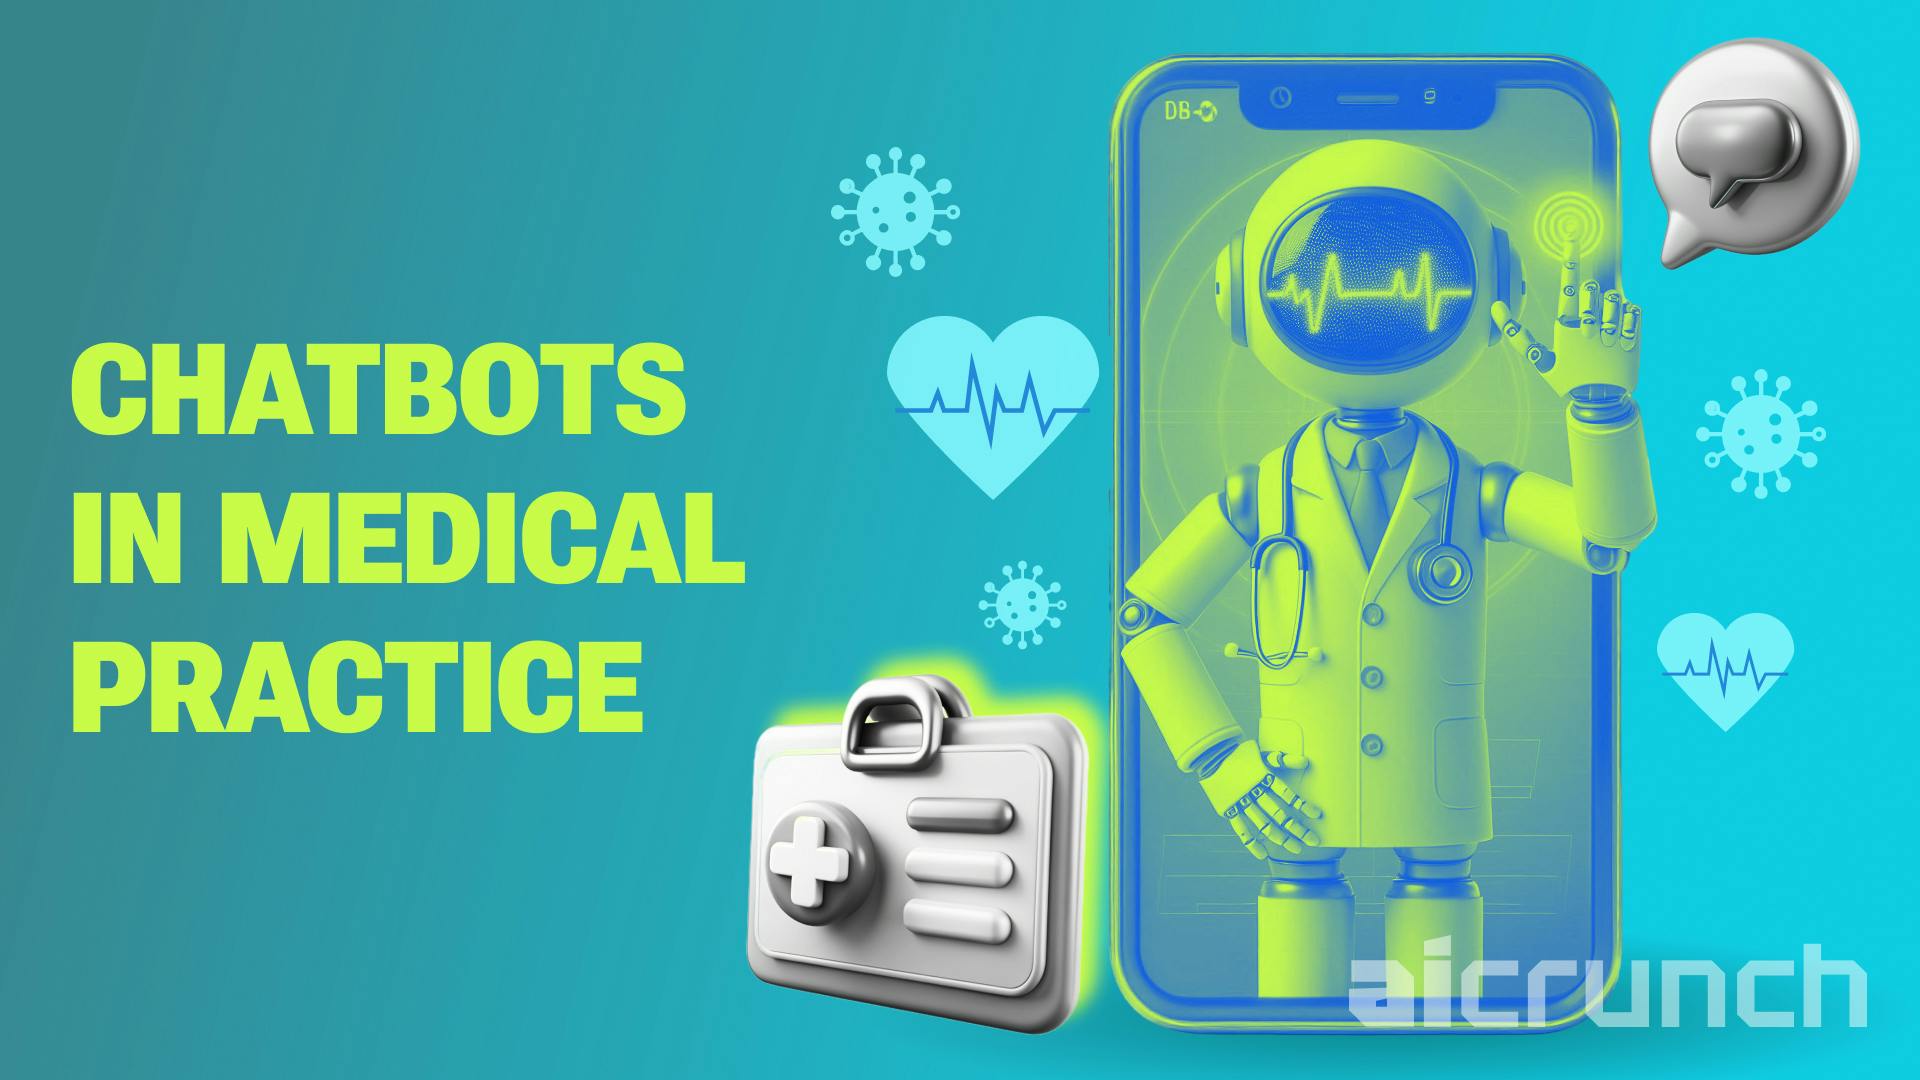 Why Healthcare Chatbot is Essential for Modern Medical Practice